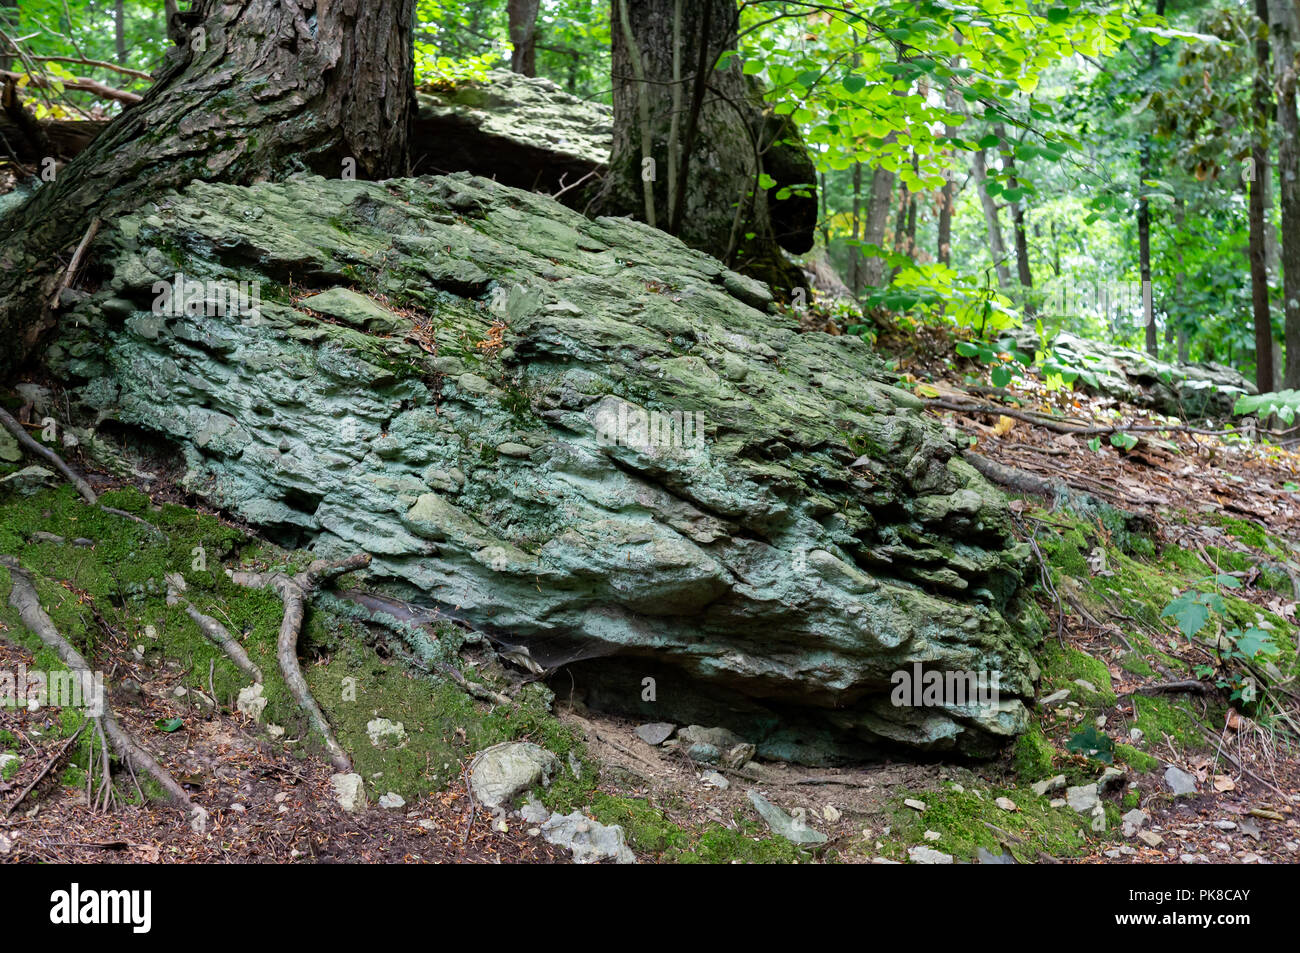 Big Mossy boulder or rock heavy looking in in the ground covered in beautiful life Stock Photo